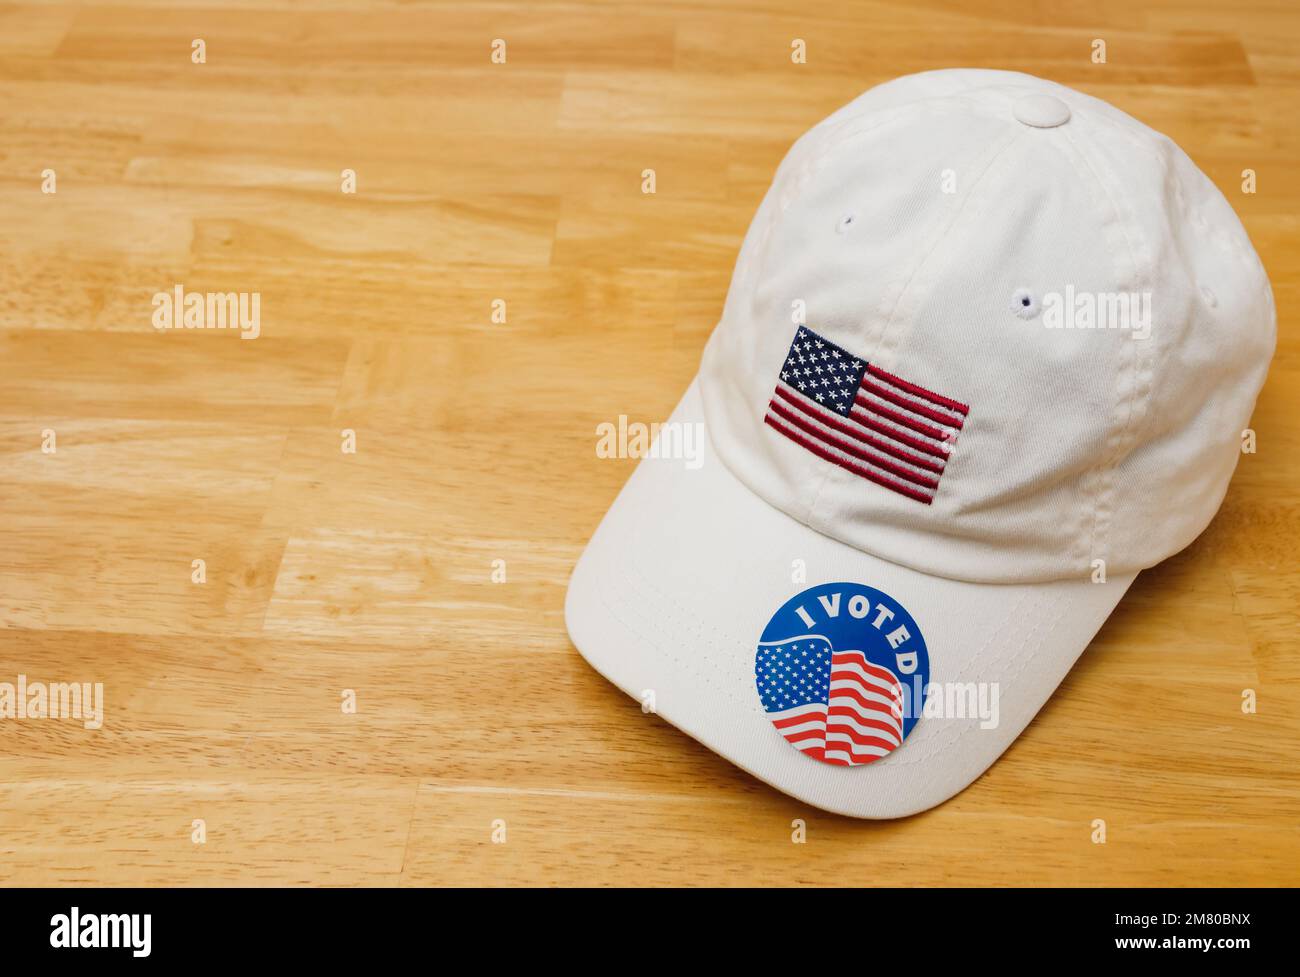 I Voted sticker on a patriotic white baseball hat with American flag on wood background. Stock Photo